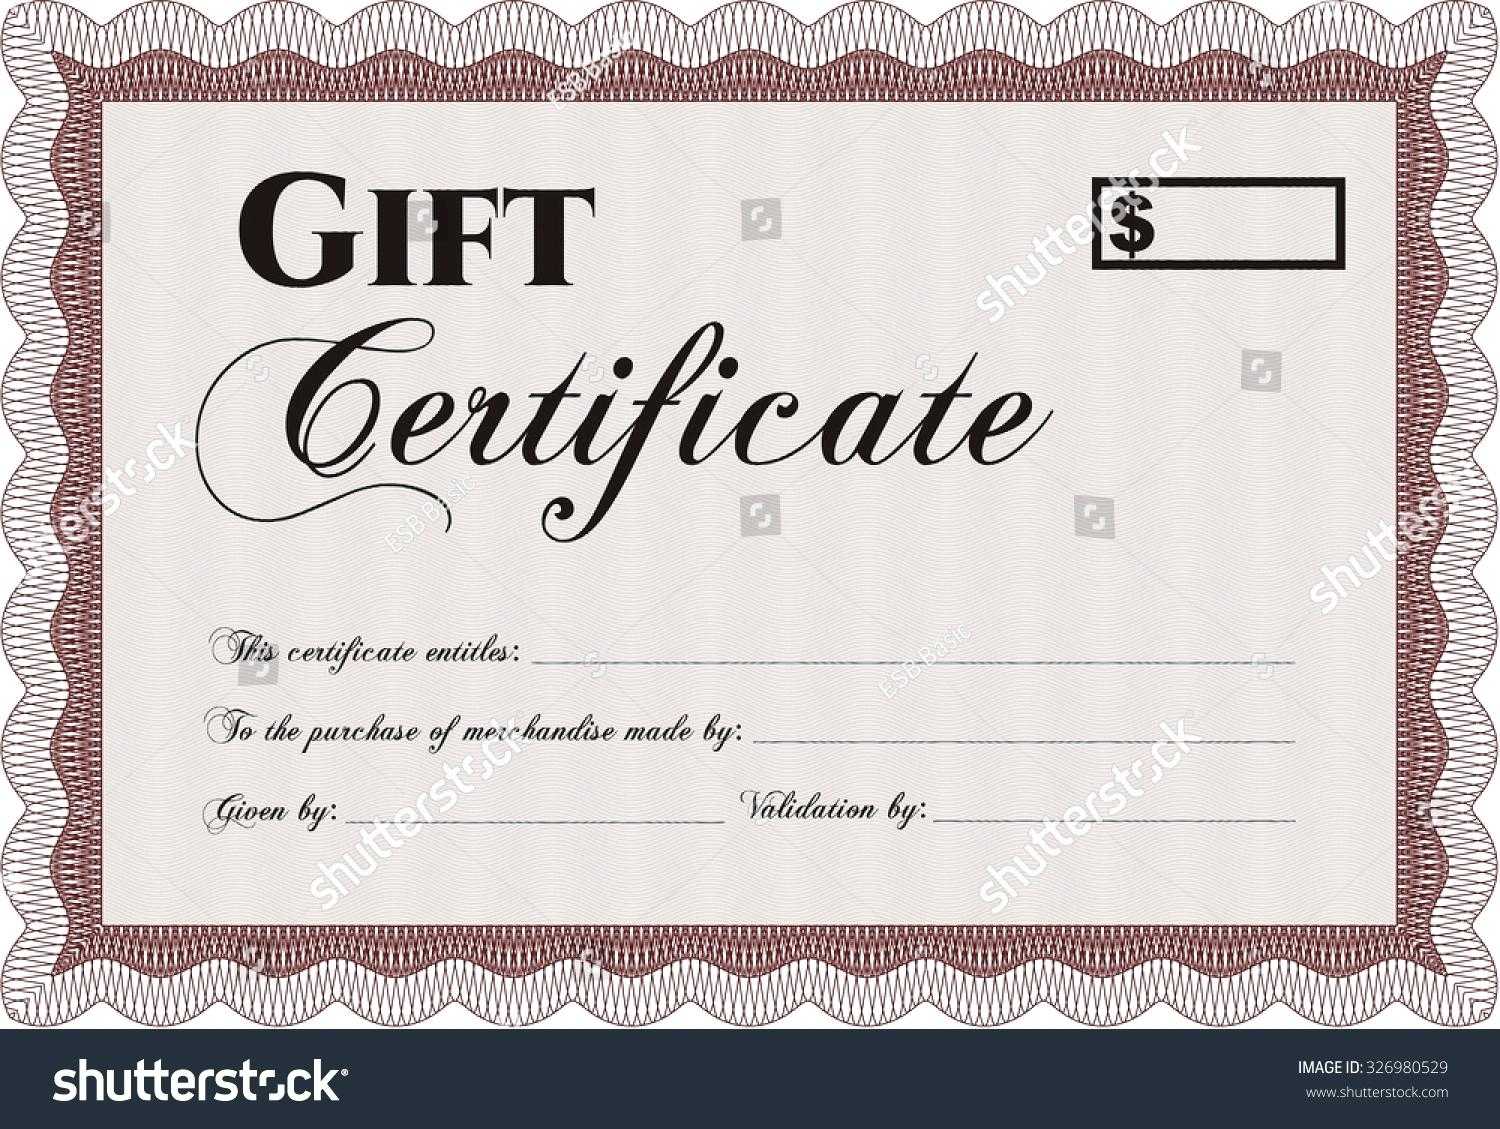 Bunch Ideas For This Certificate Entitles The Bearer For This Certificate Entitles The Bearer Template